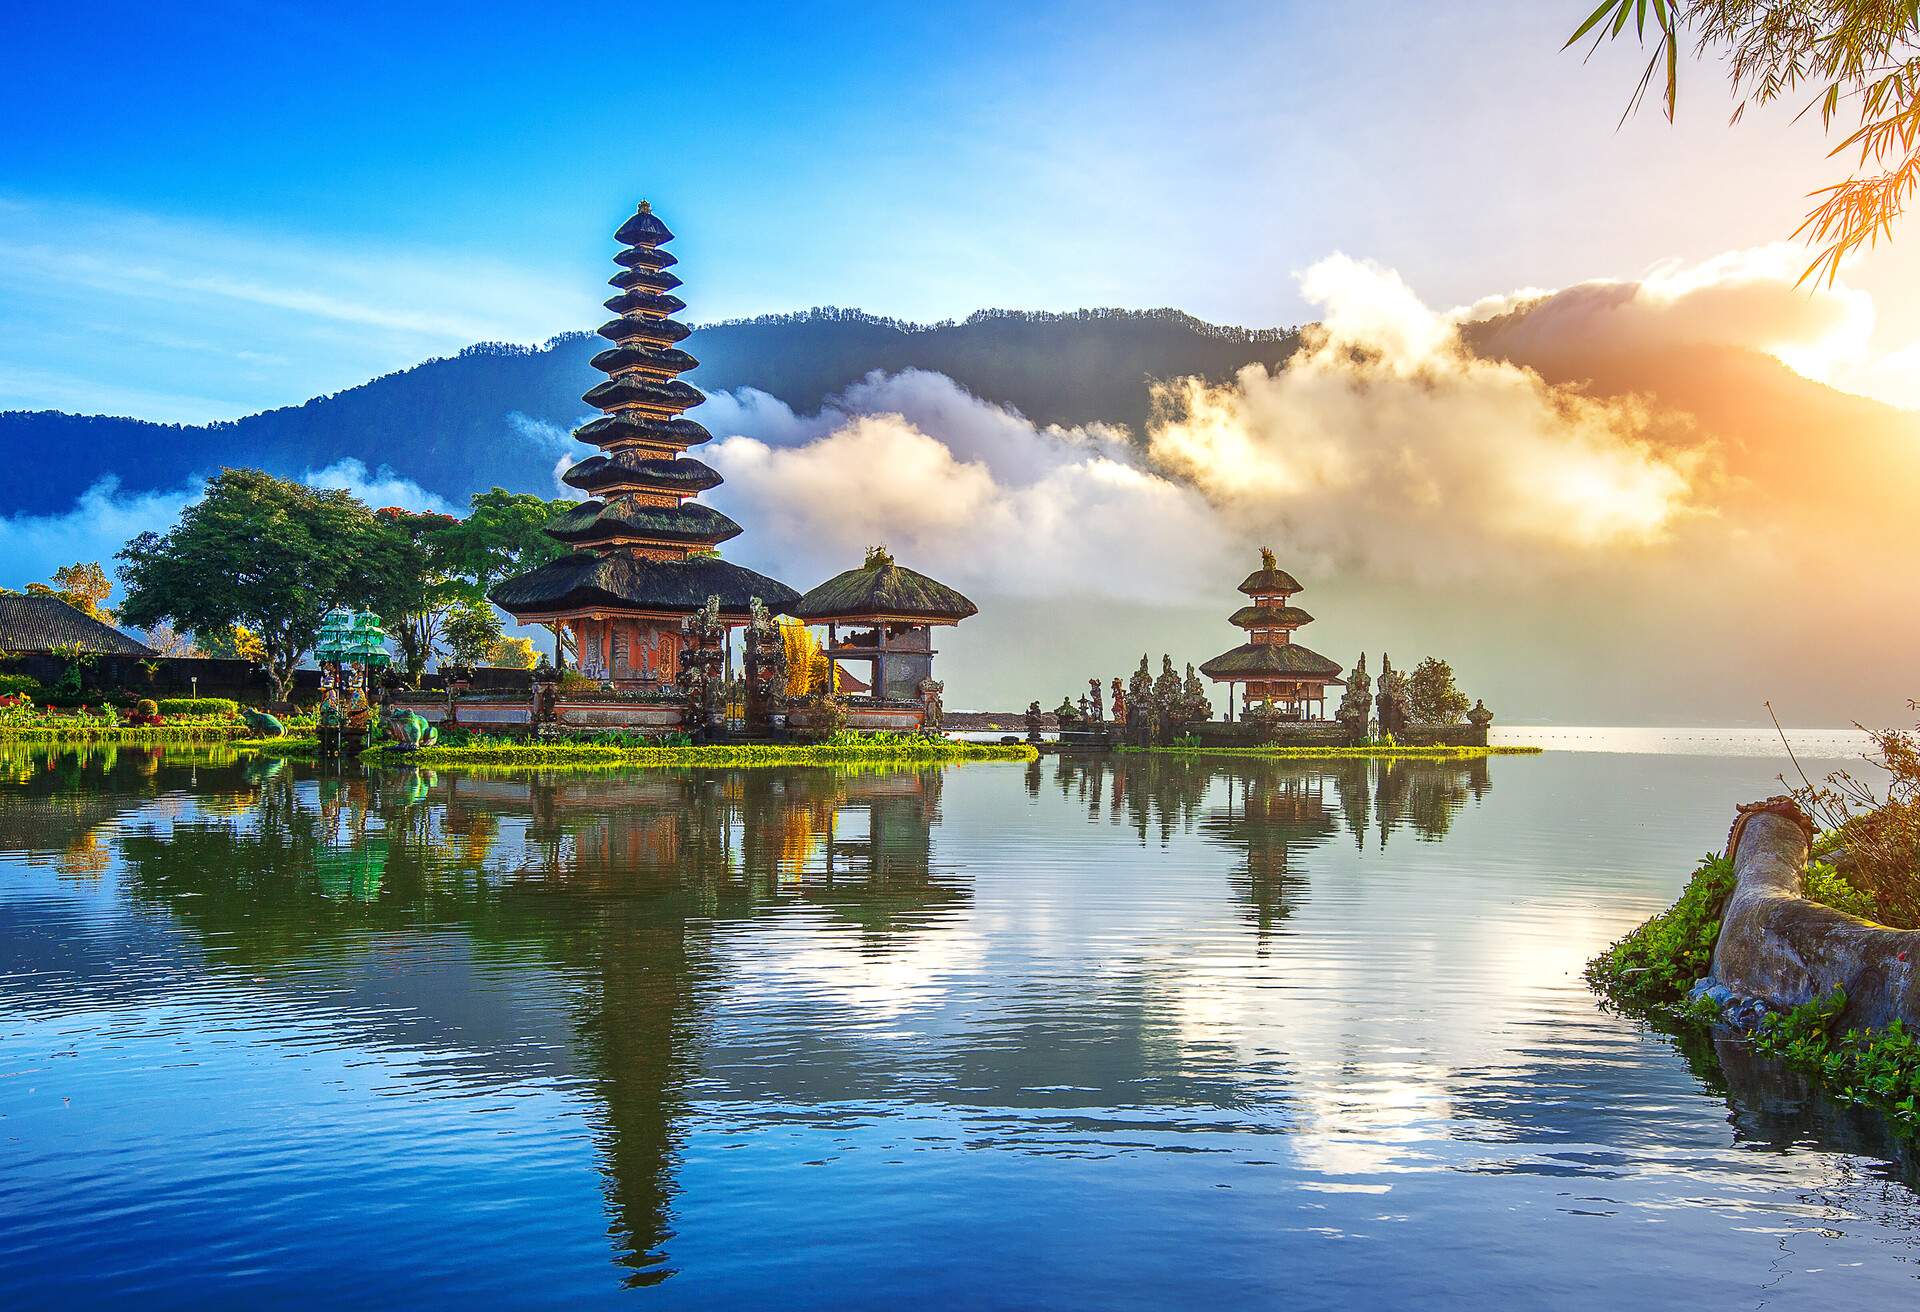 A captivating village with temples towering over the lake water with foggy mountains in the background.